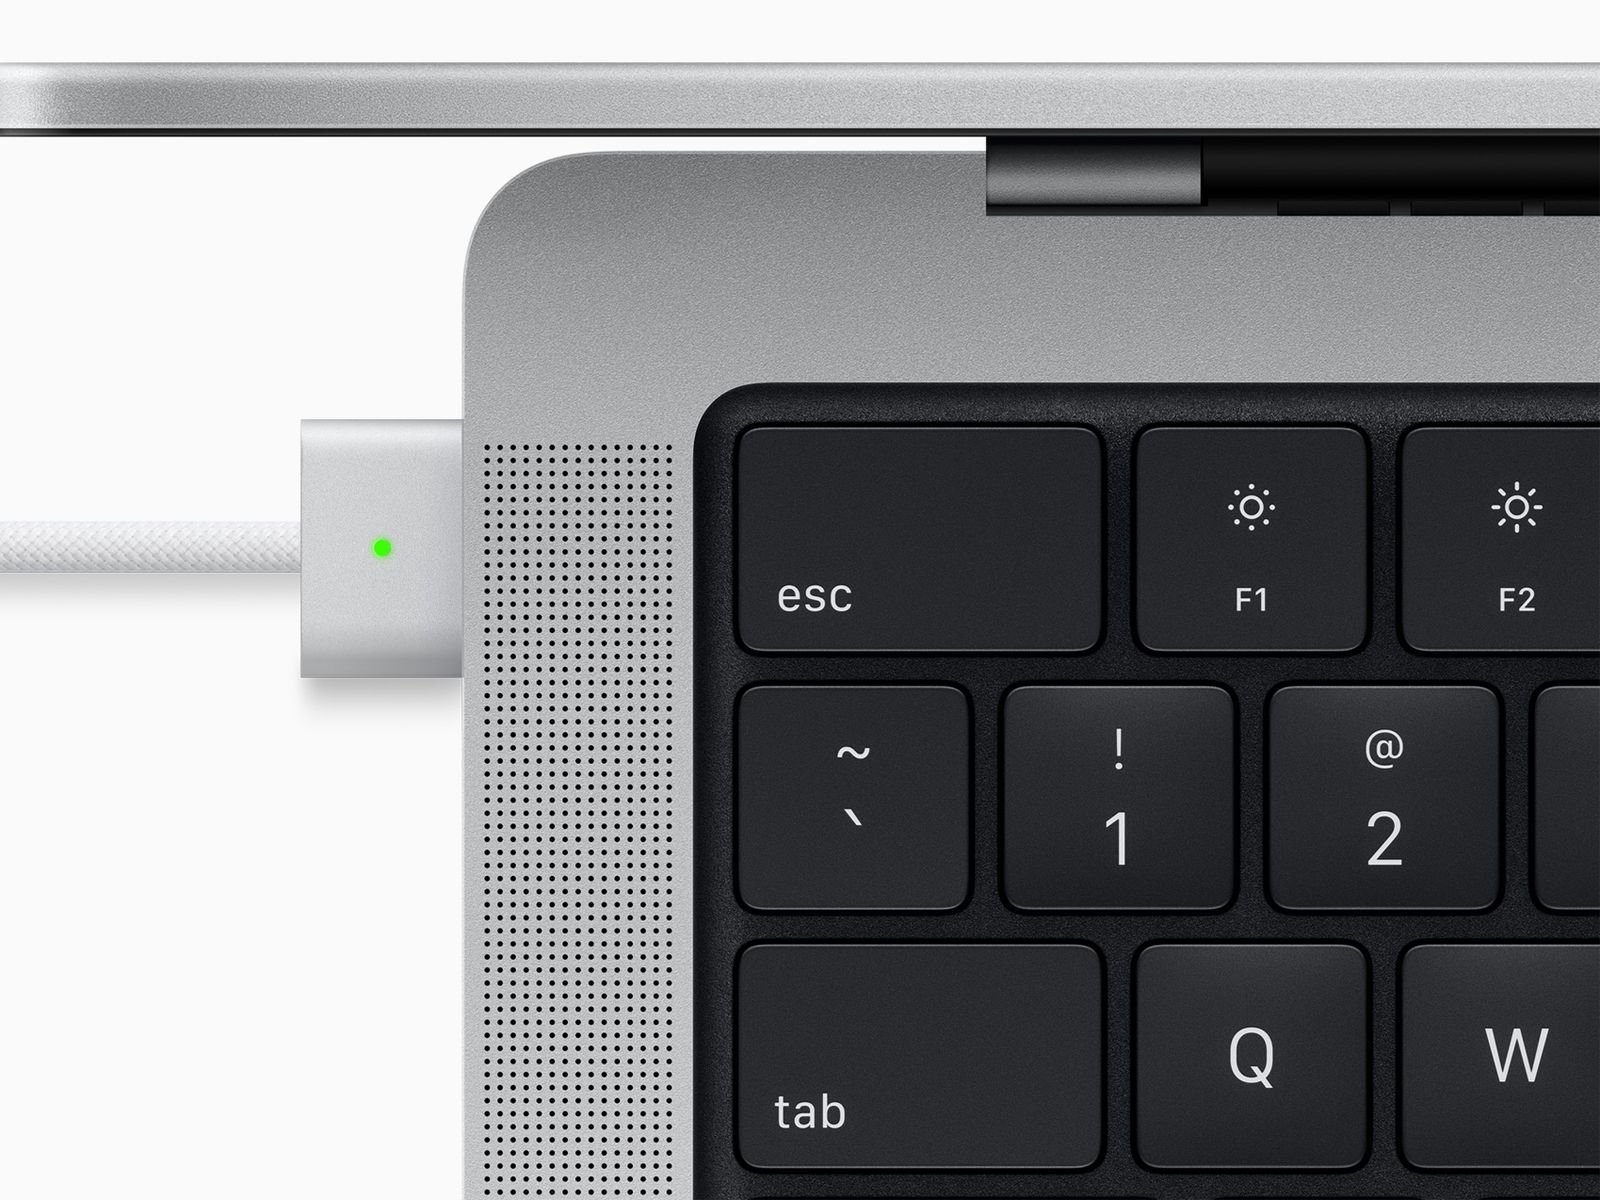 14-inch MacBook Pro Can Fast Charge Via Thunderbolt, But Fast Charge Limited MagSafe in 16-inch - MacRumors